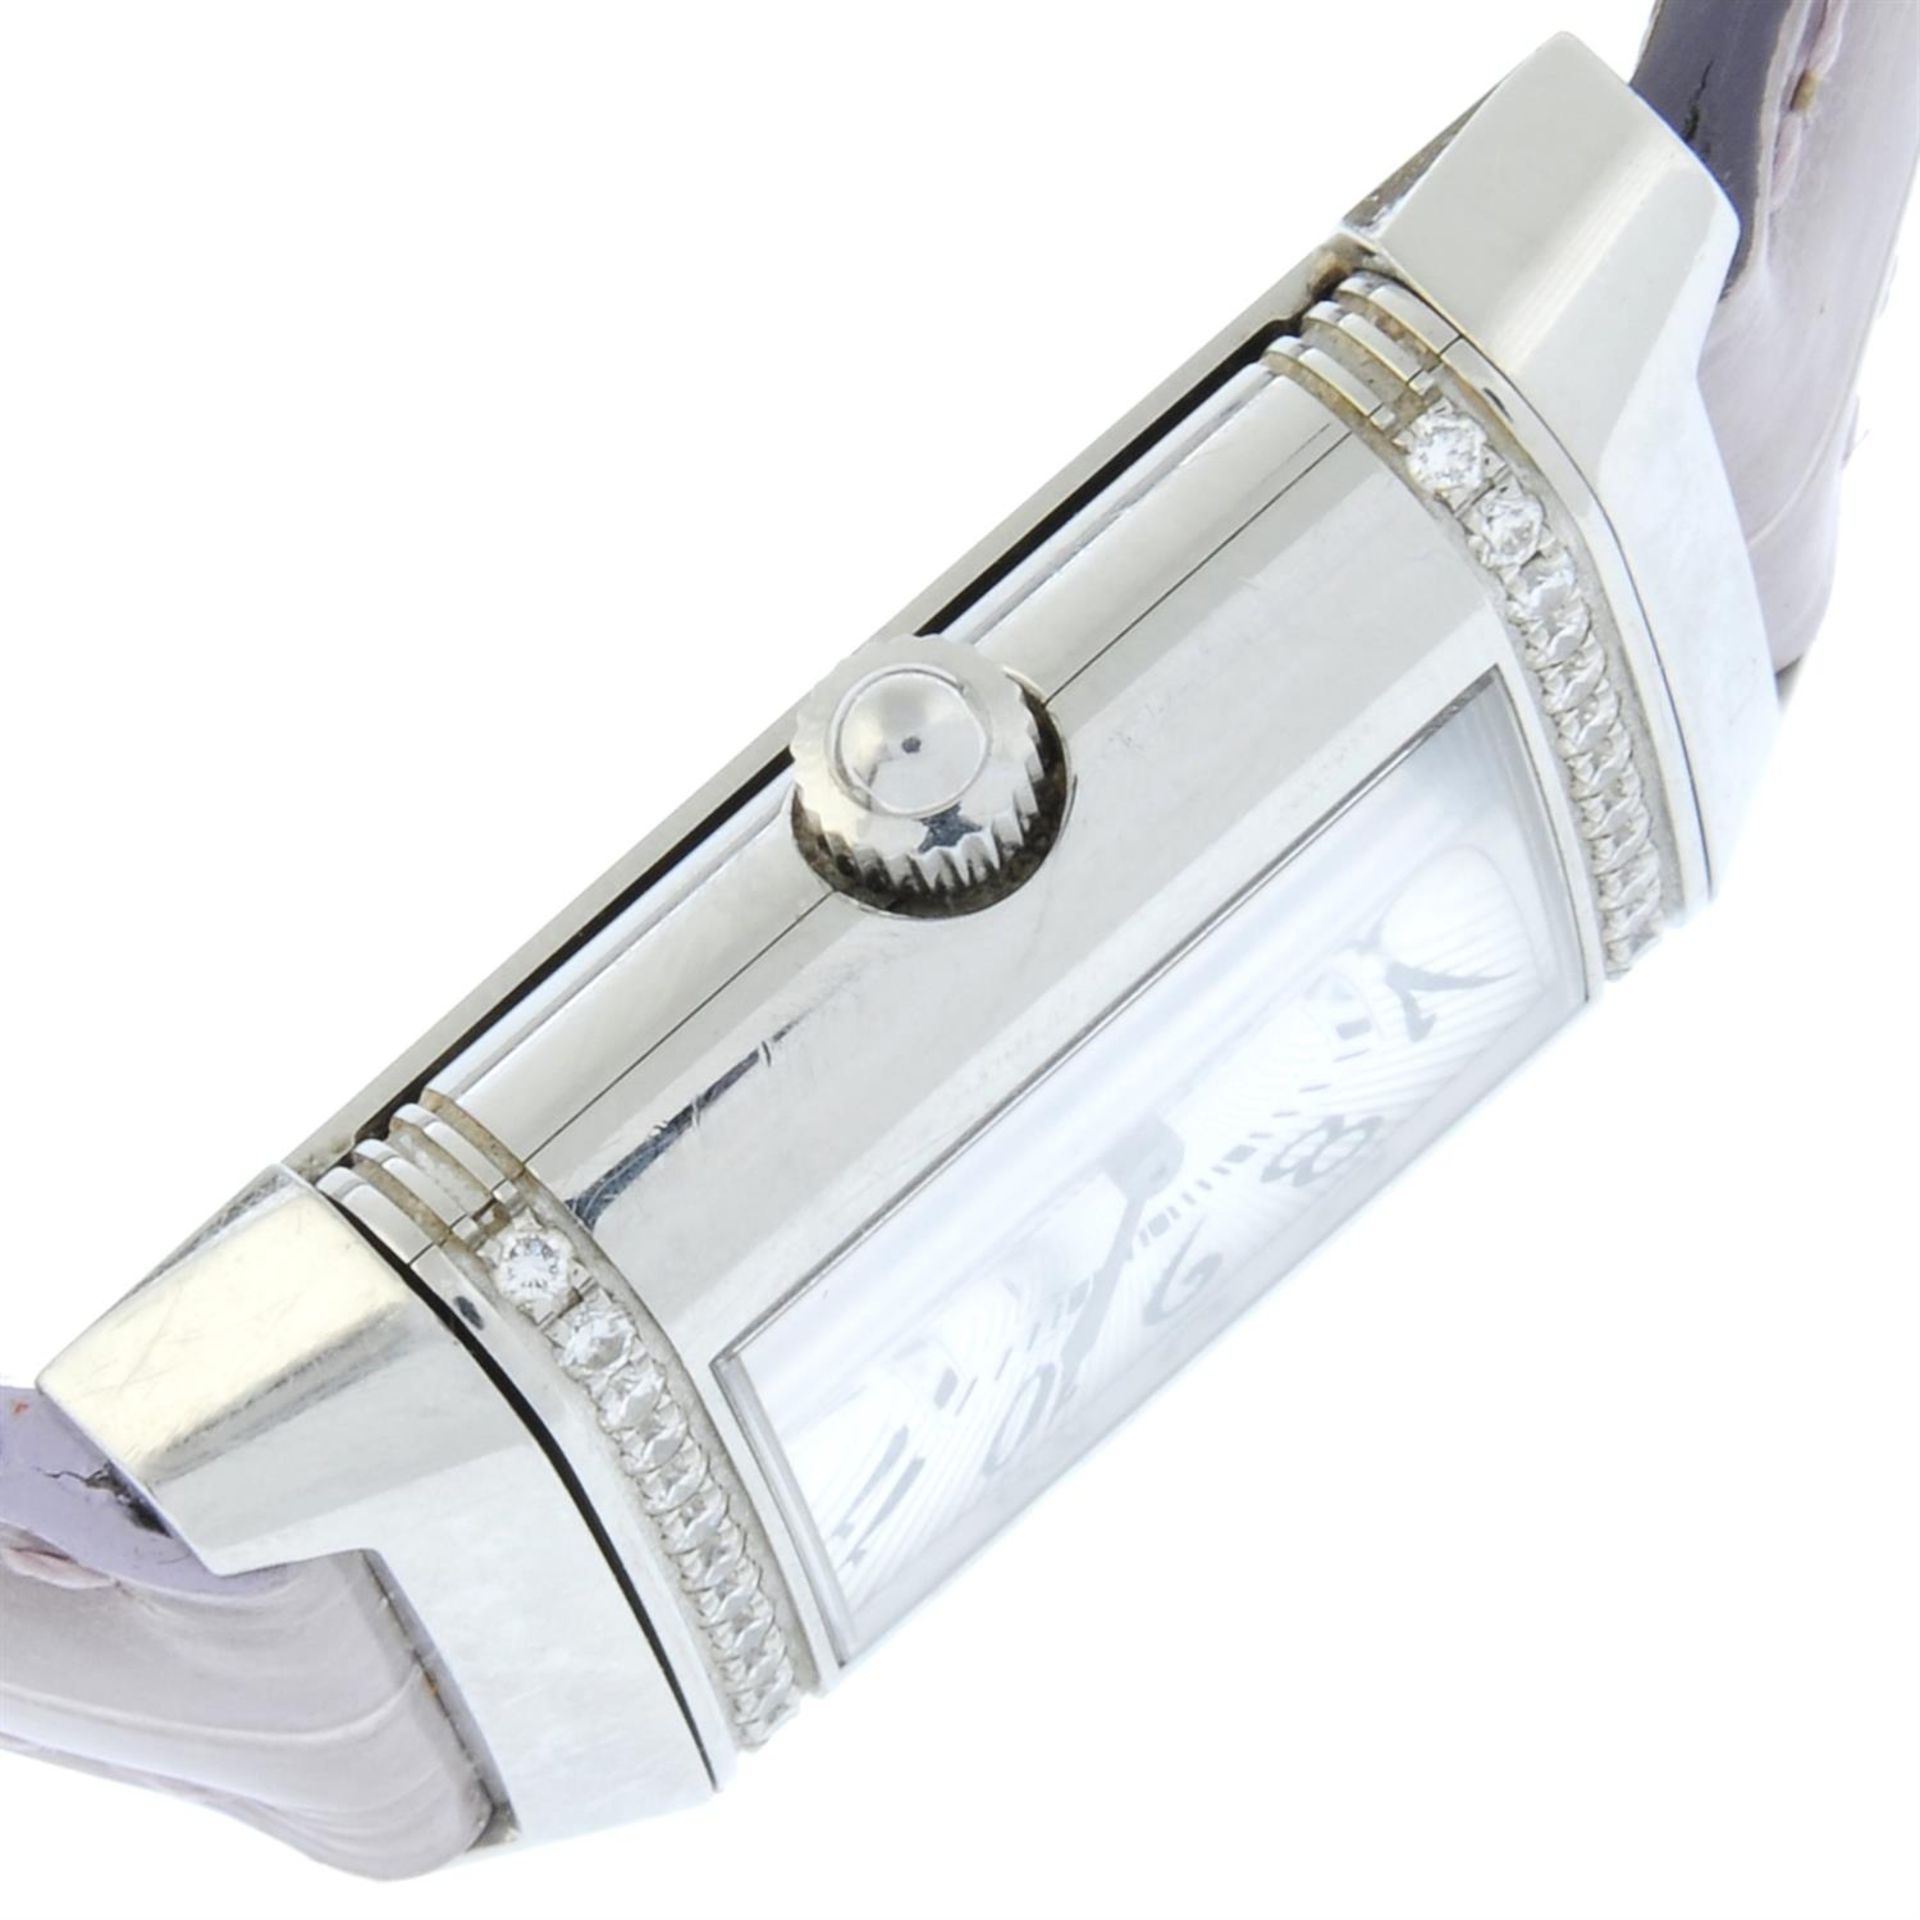 Jaeger-LeCoultre - a Reverso Florale watch, 20mm. - Image 3 of 6